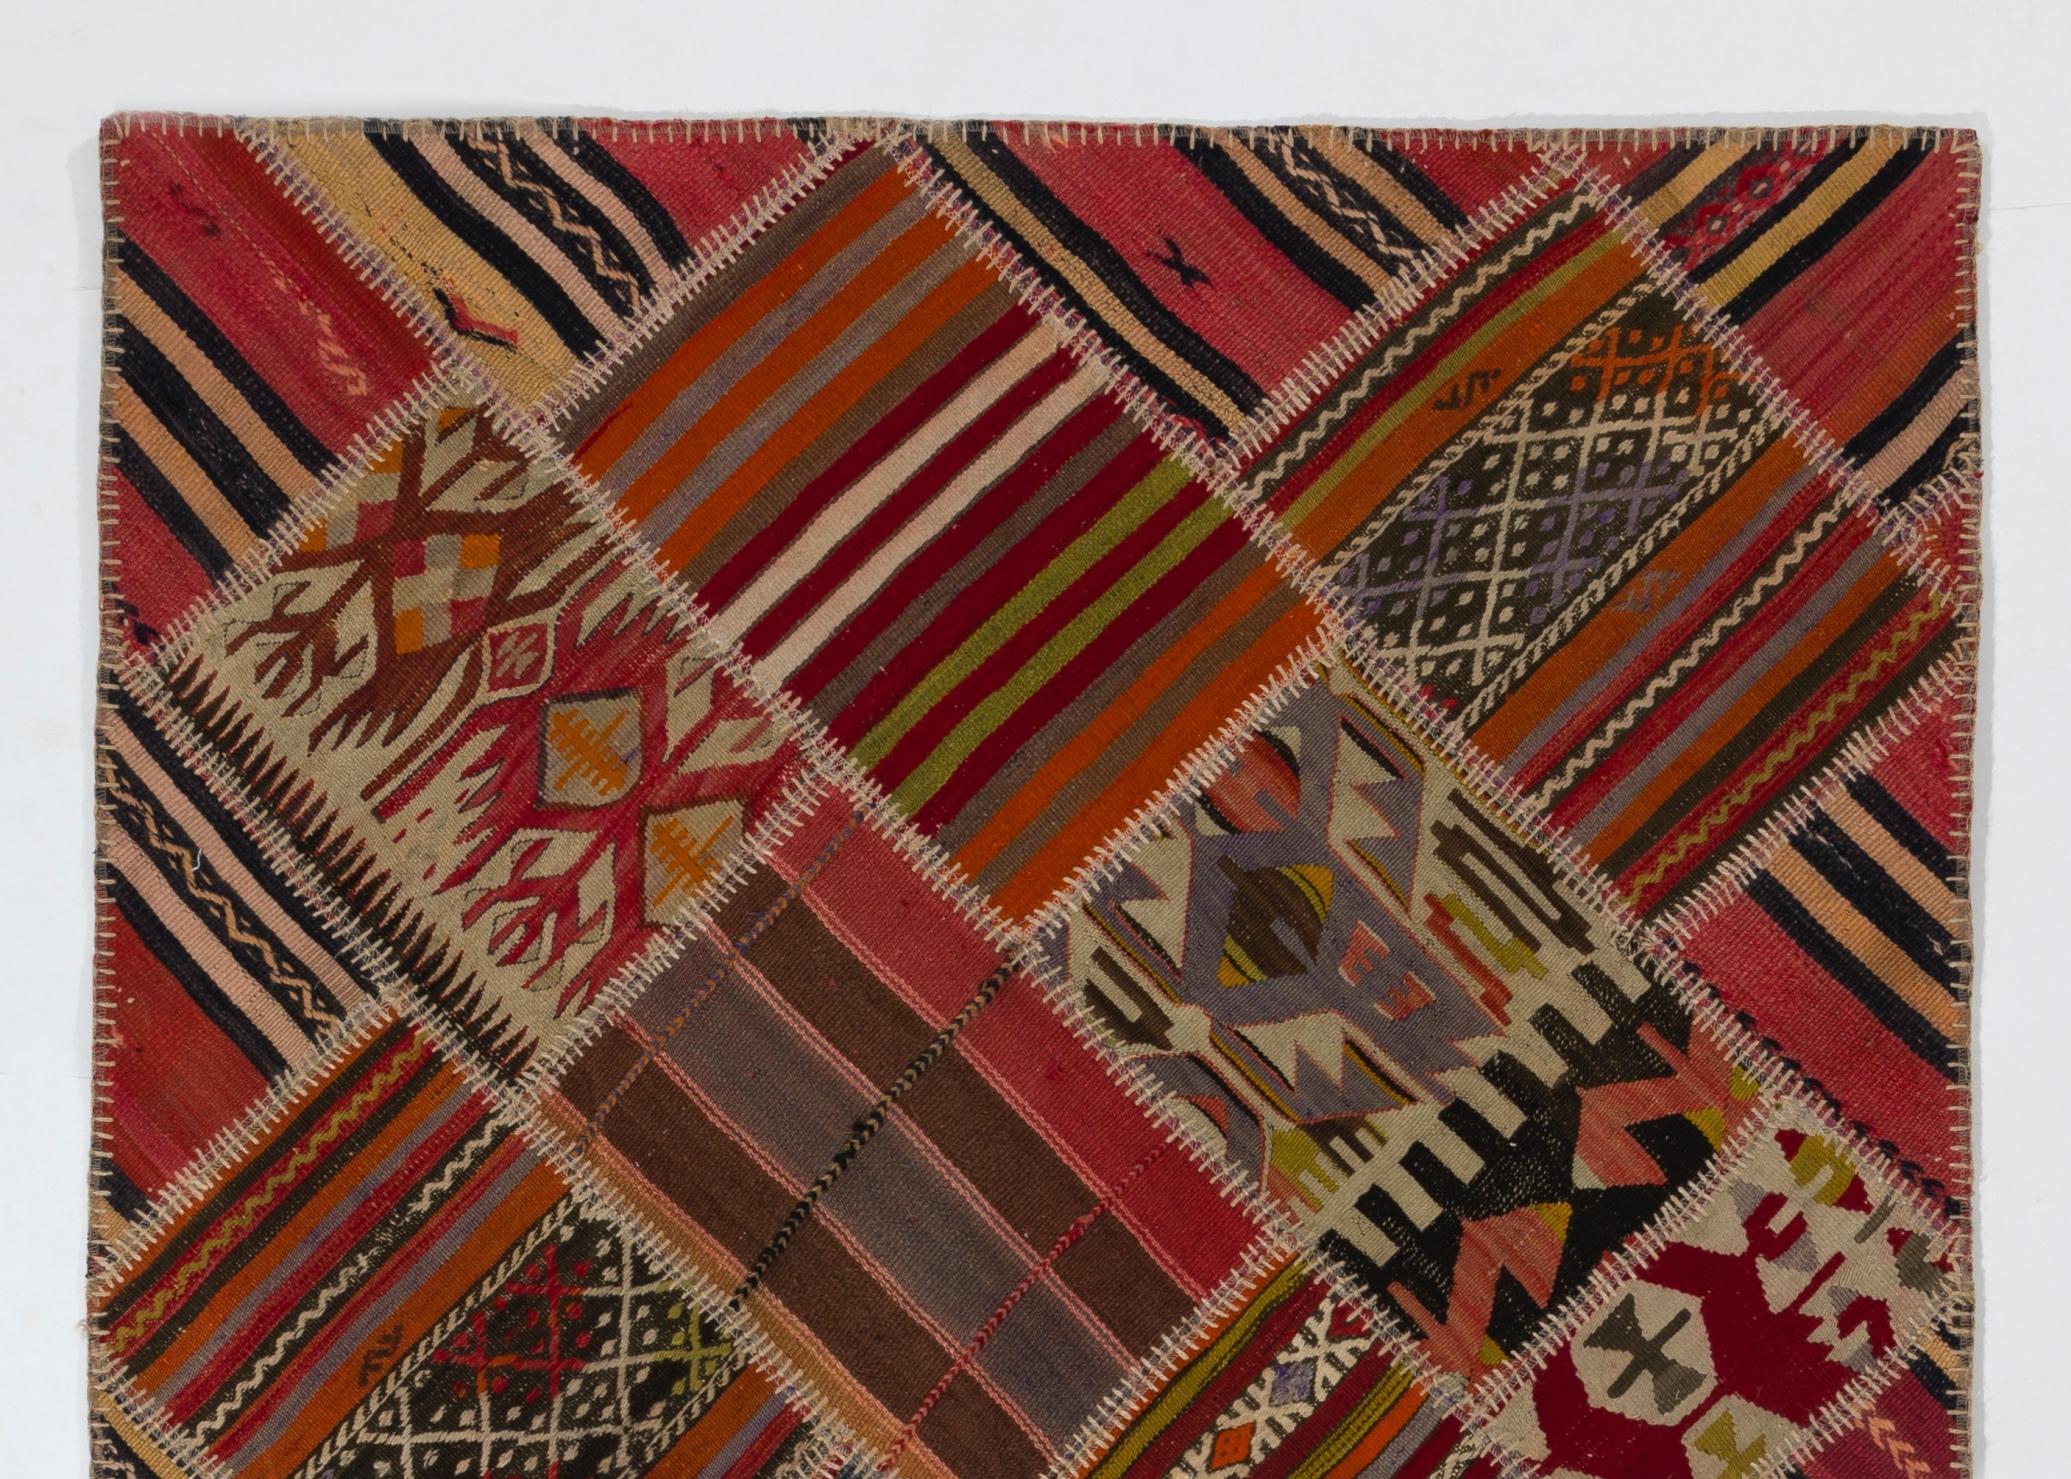 A colorful, cheerful Turkish Kilim rug (flat-weave) hand-stitched from pieces of hand-woven Turkish Kilim. It features an assortment of patches in vivid colors with a variety classical Kilim motifs that help create high visual interest. 

The Kilim